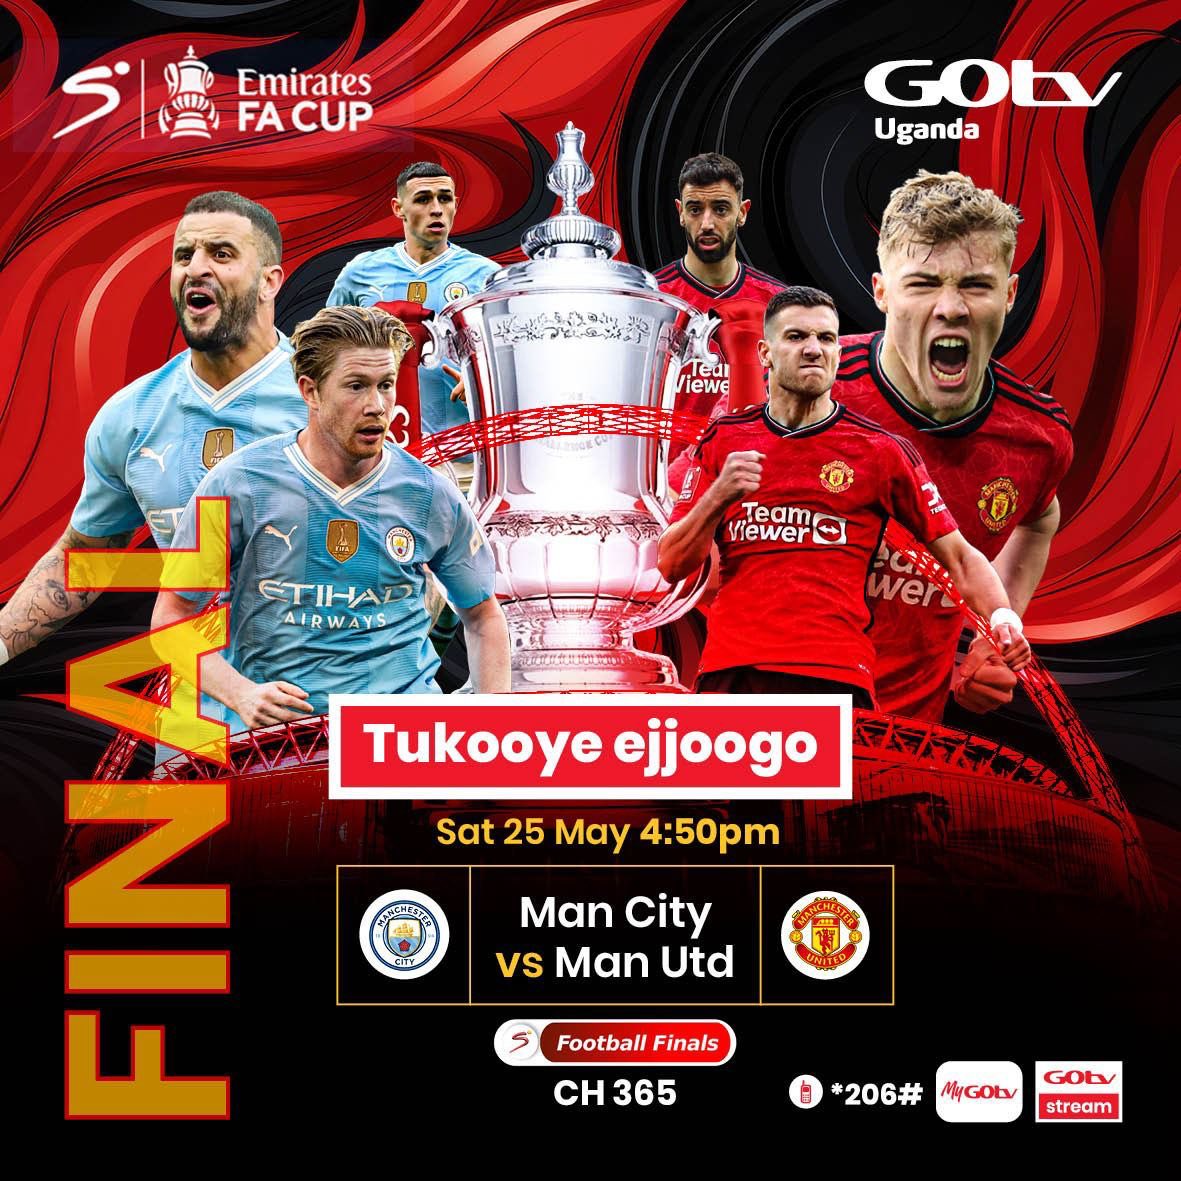 Do you think Man United can grab this trophy away from Man City ? #GOtvFootballMadness